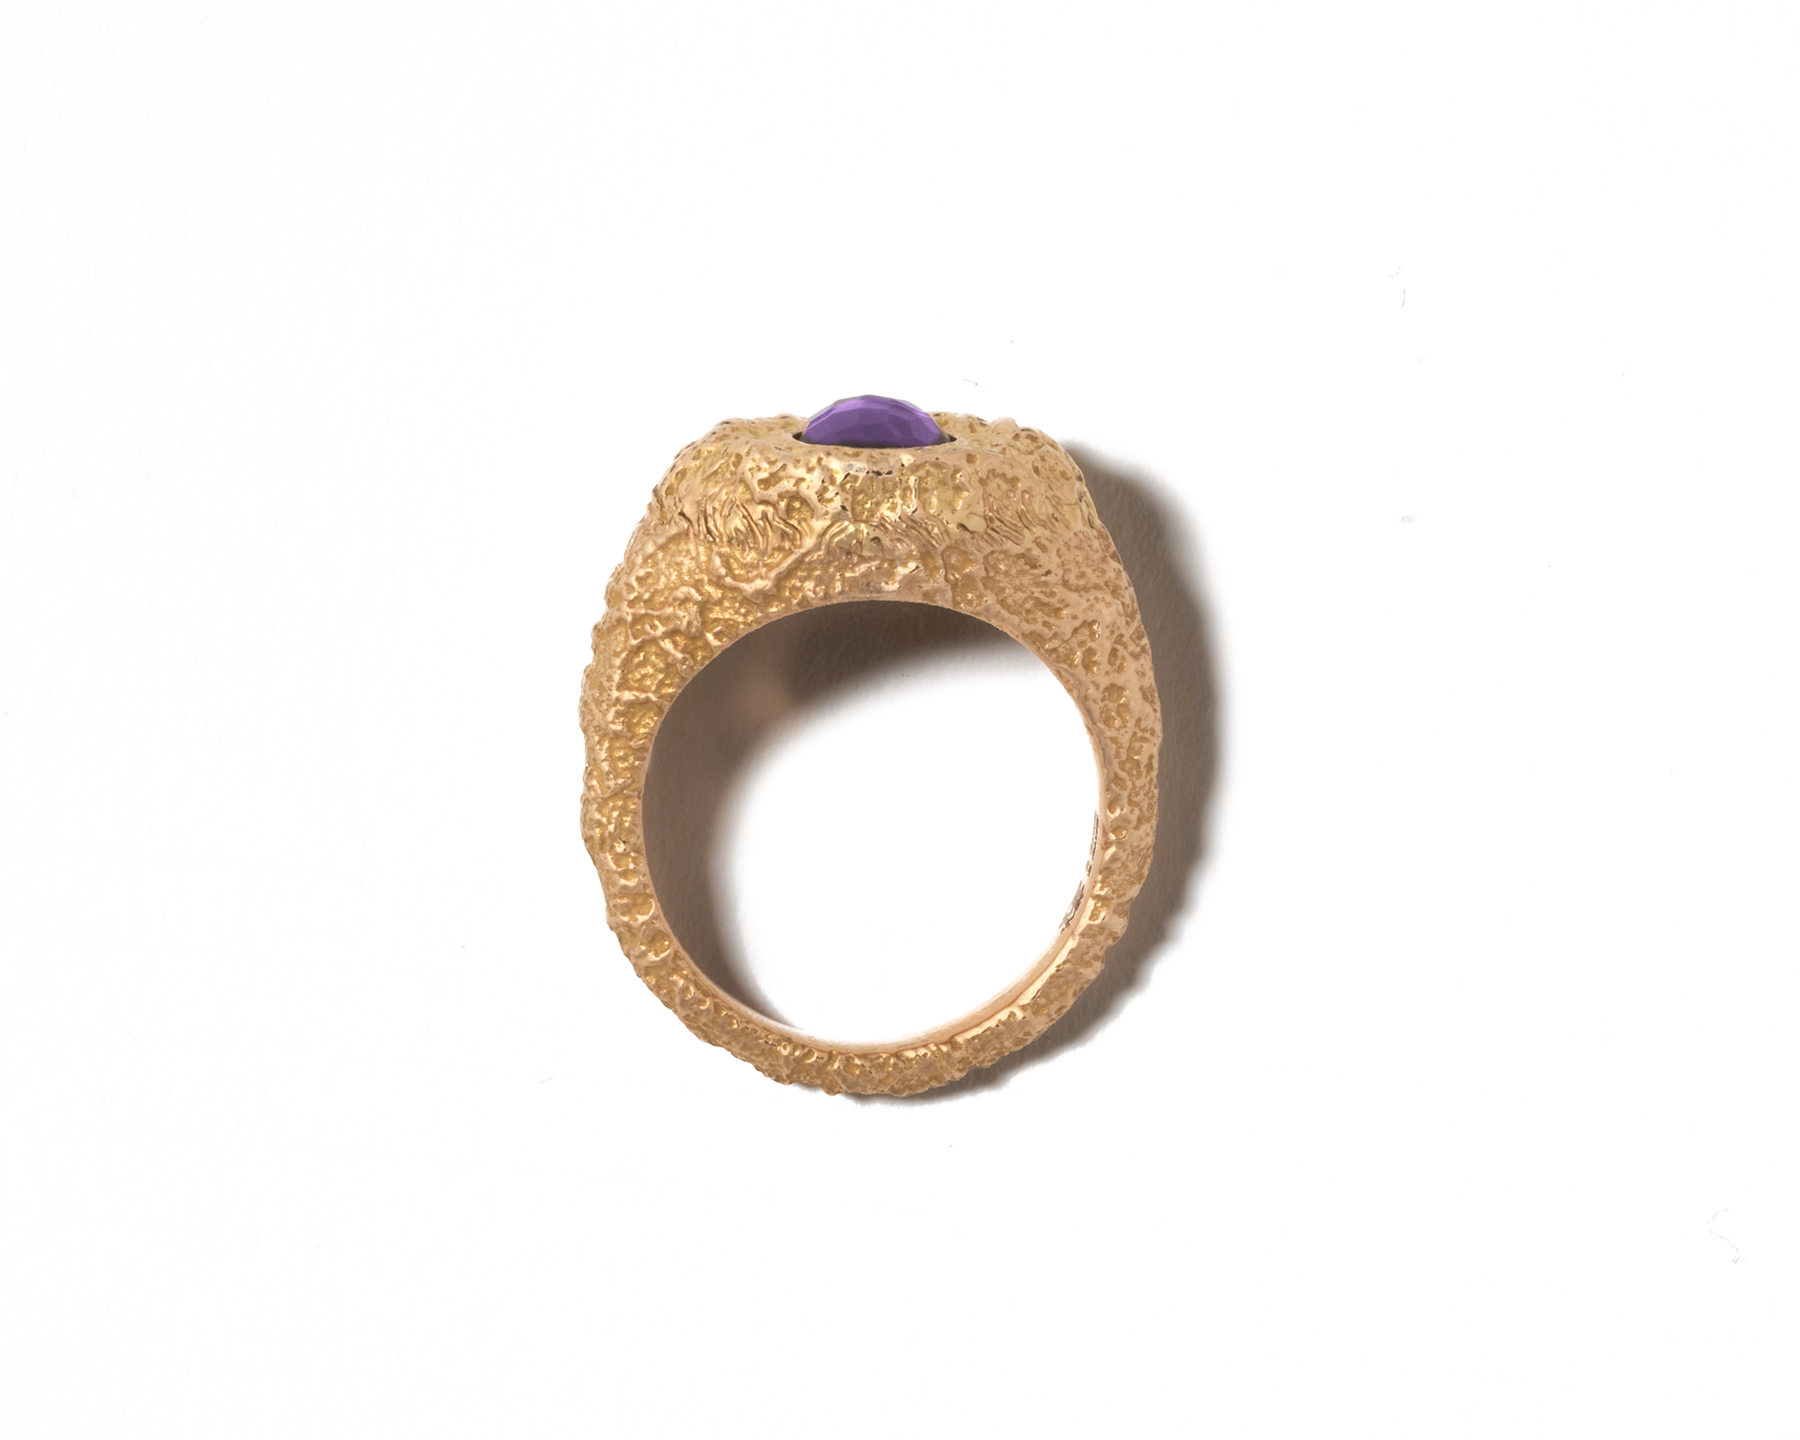 Front shot of gold amethyst ring against white backdrop